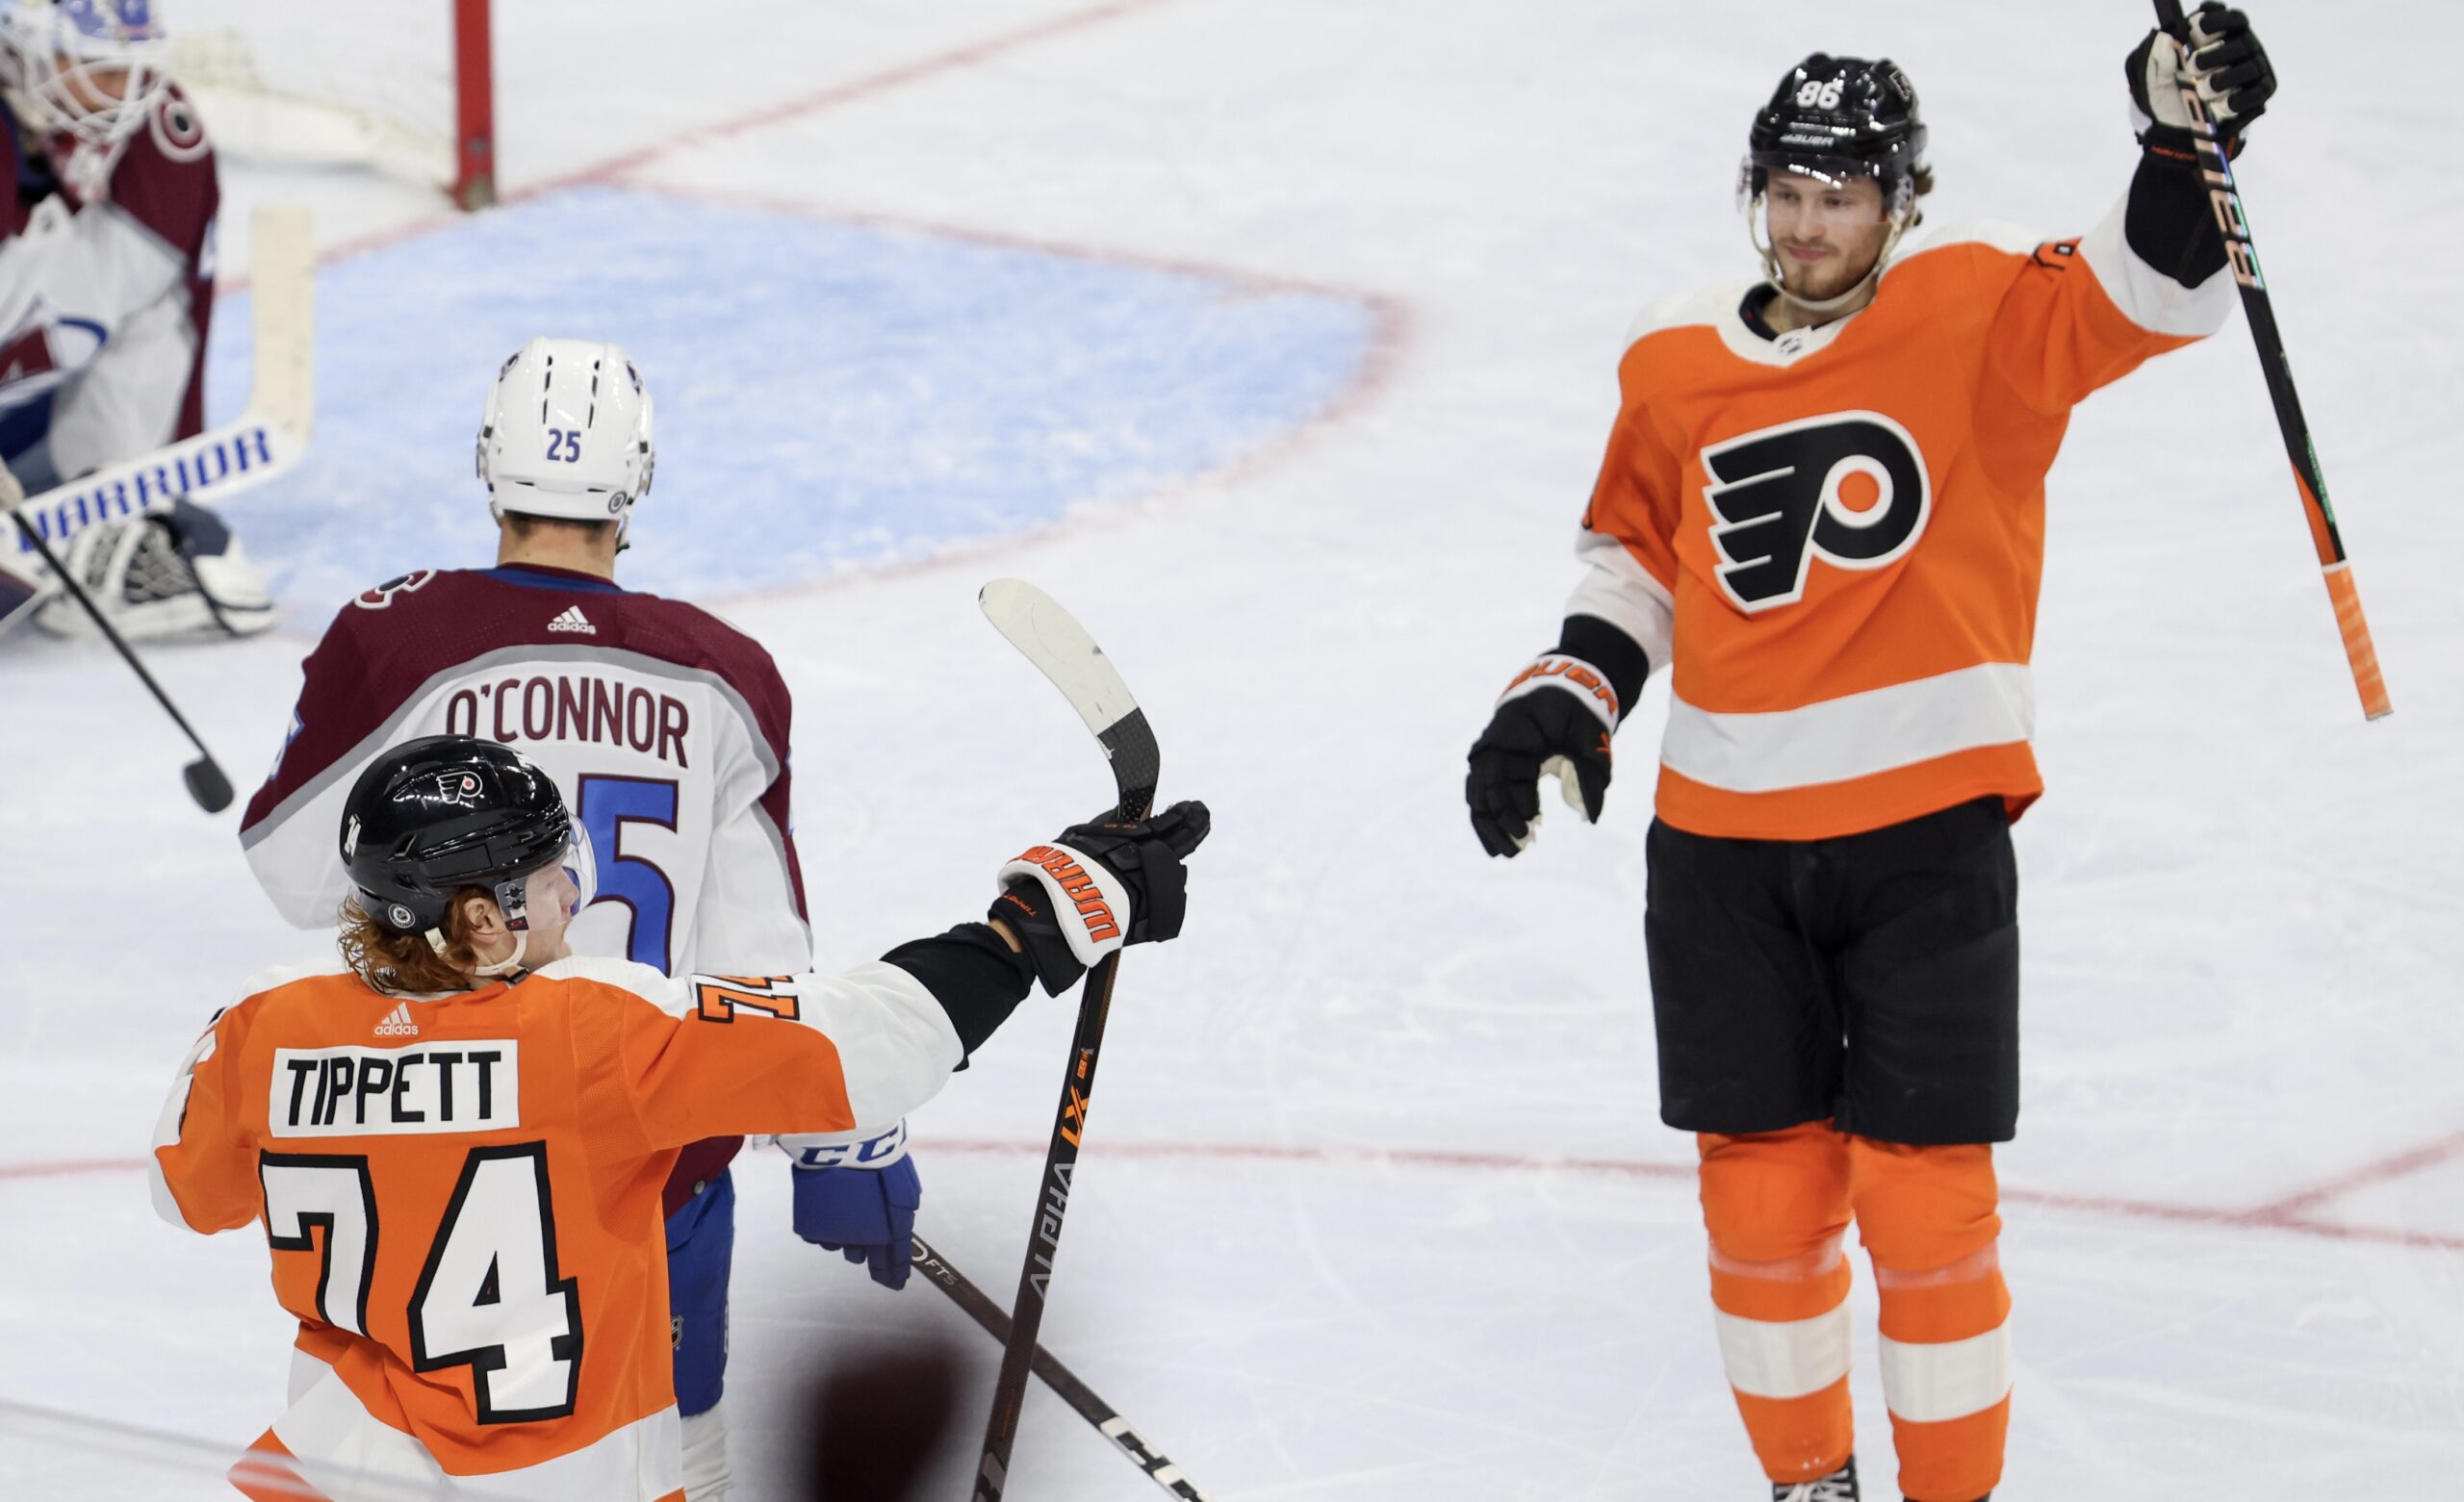 Not in Hall of Fame - Top 50 Philadelphia Flyers